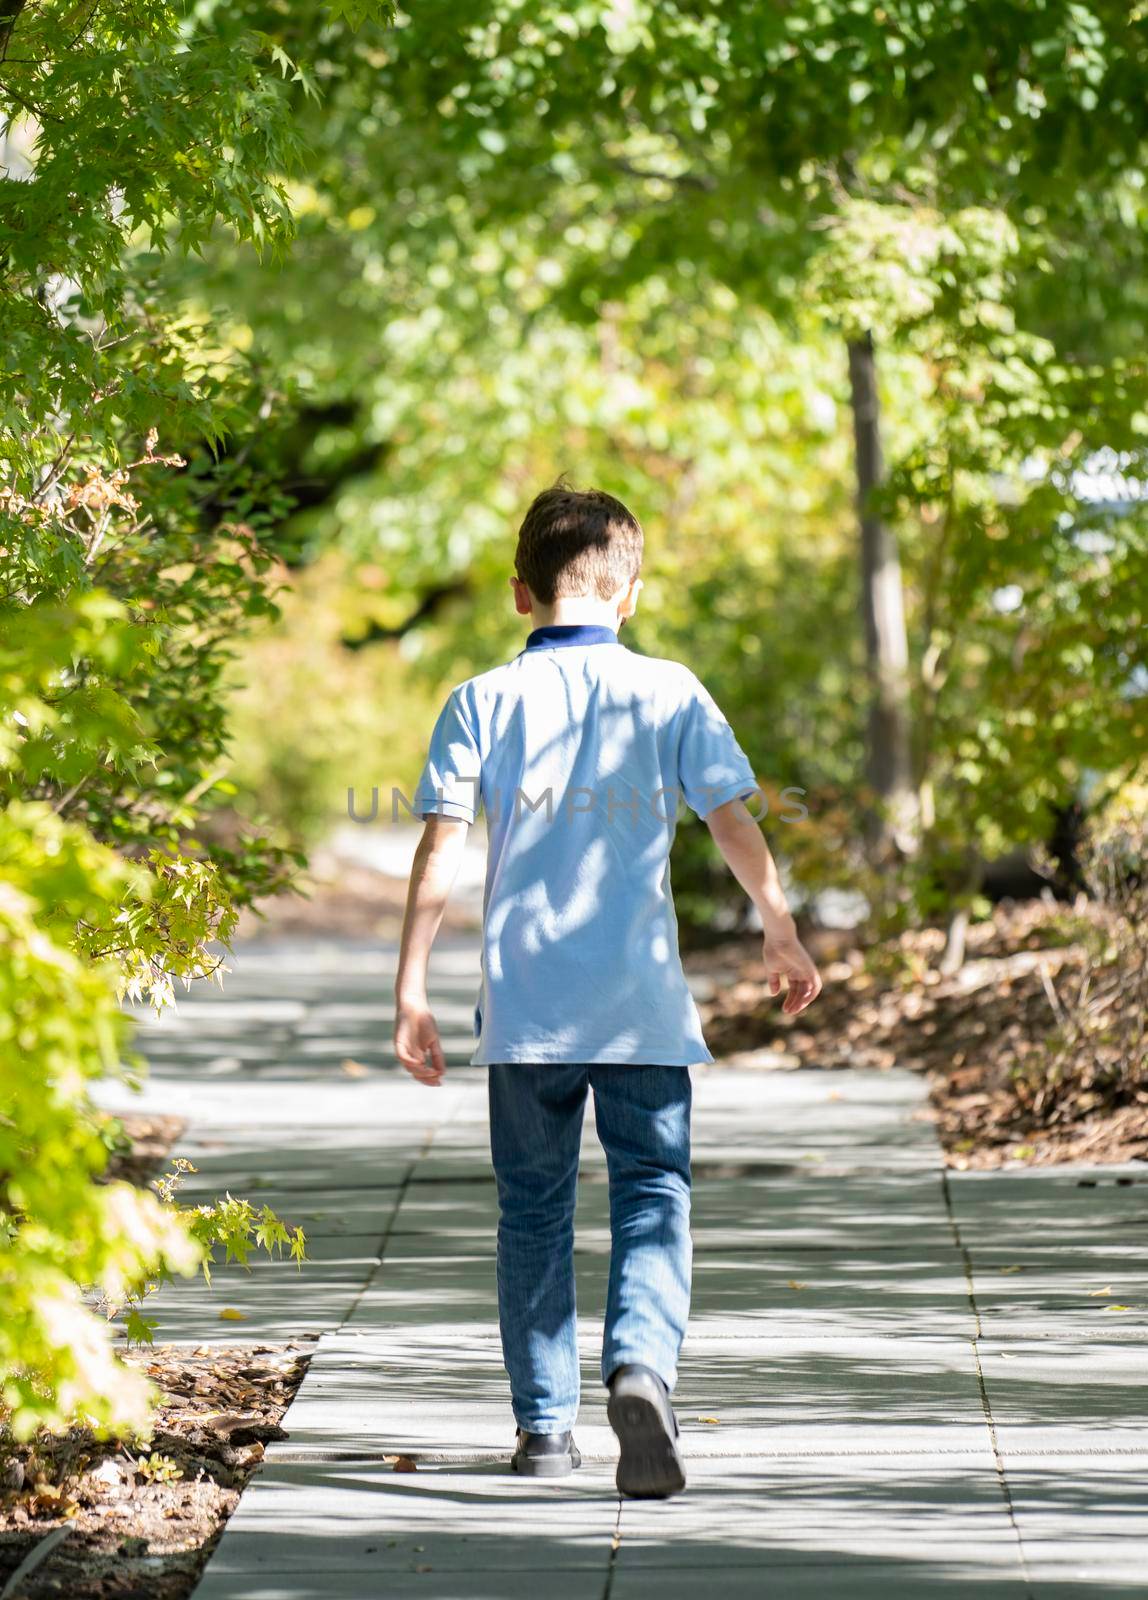 Blond teenage boy casual clothing walking relaxed along alley with trees and shadows. Bushes as blurred background. Copy space